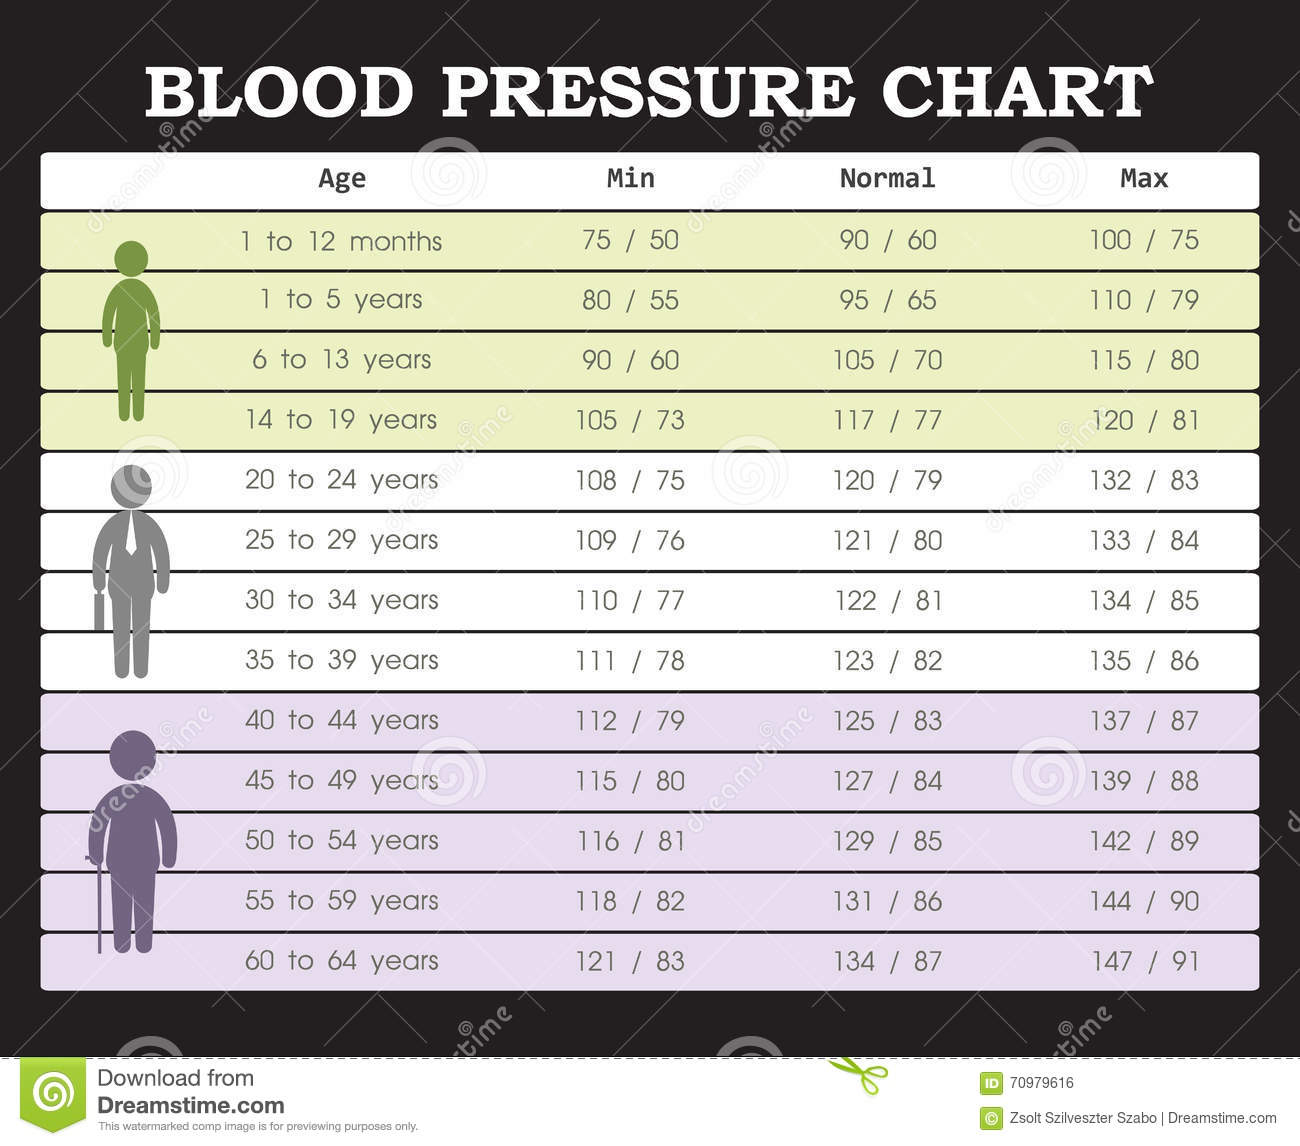 Blood pressure chart stock vector. Image of graph, instrument